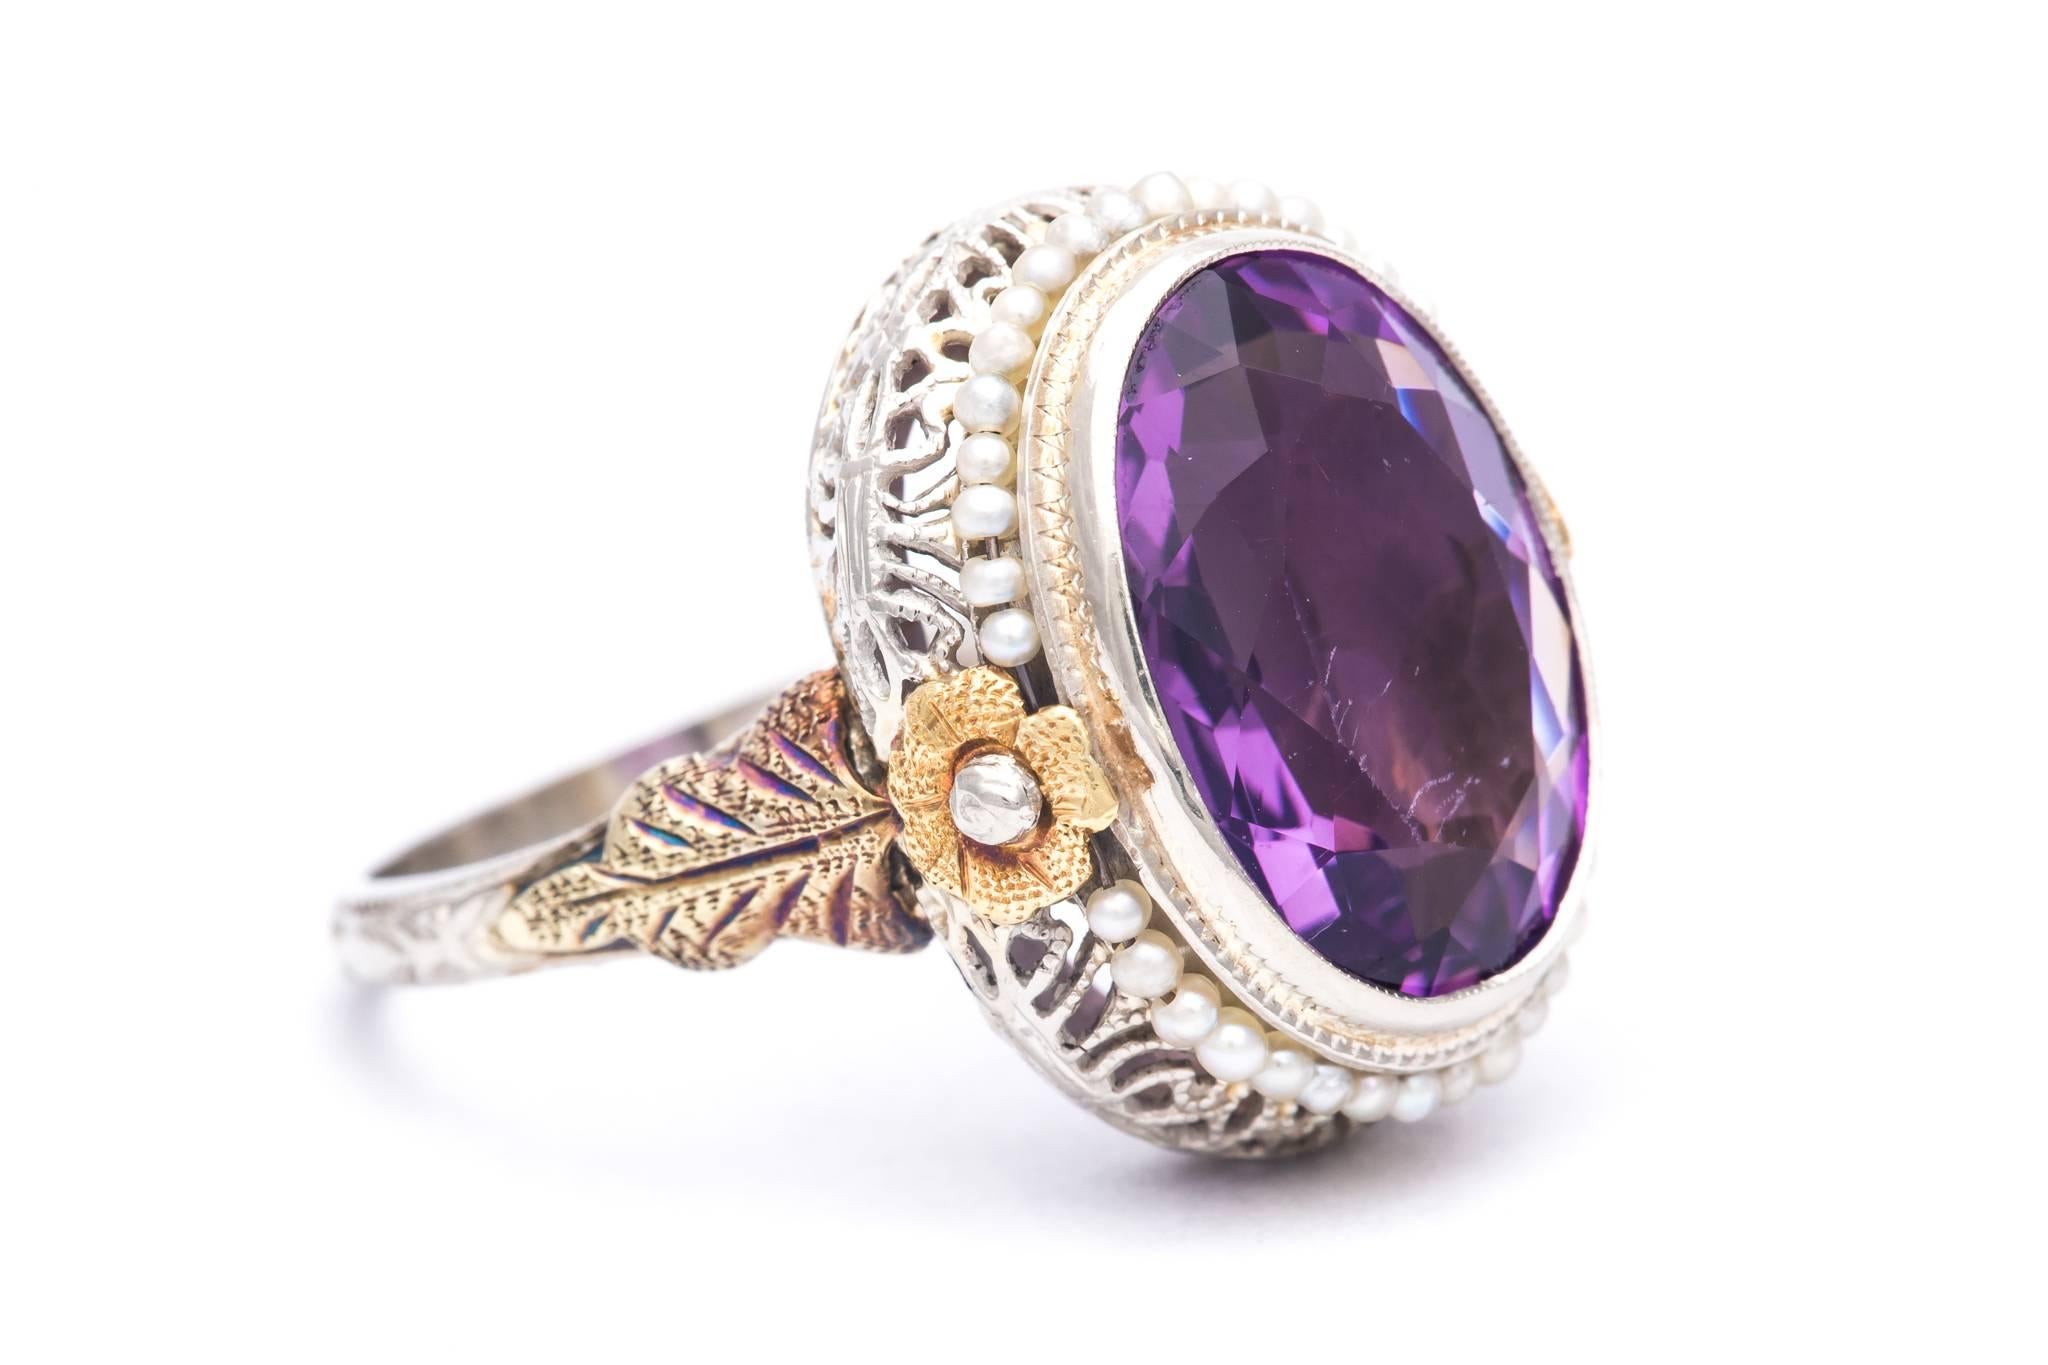 An art deco period amethyst and pearl ring in yellow and white gold.  Centered by a 13 carat oval cut amethyst surrounded by natural pearls this ring features a beautiful hand crafted and hand engraved filigree mounting in 14 karat gold.

Grading as